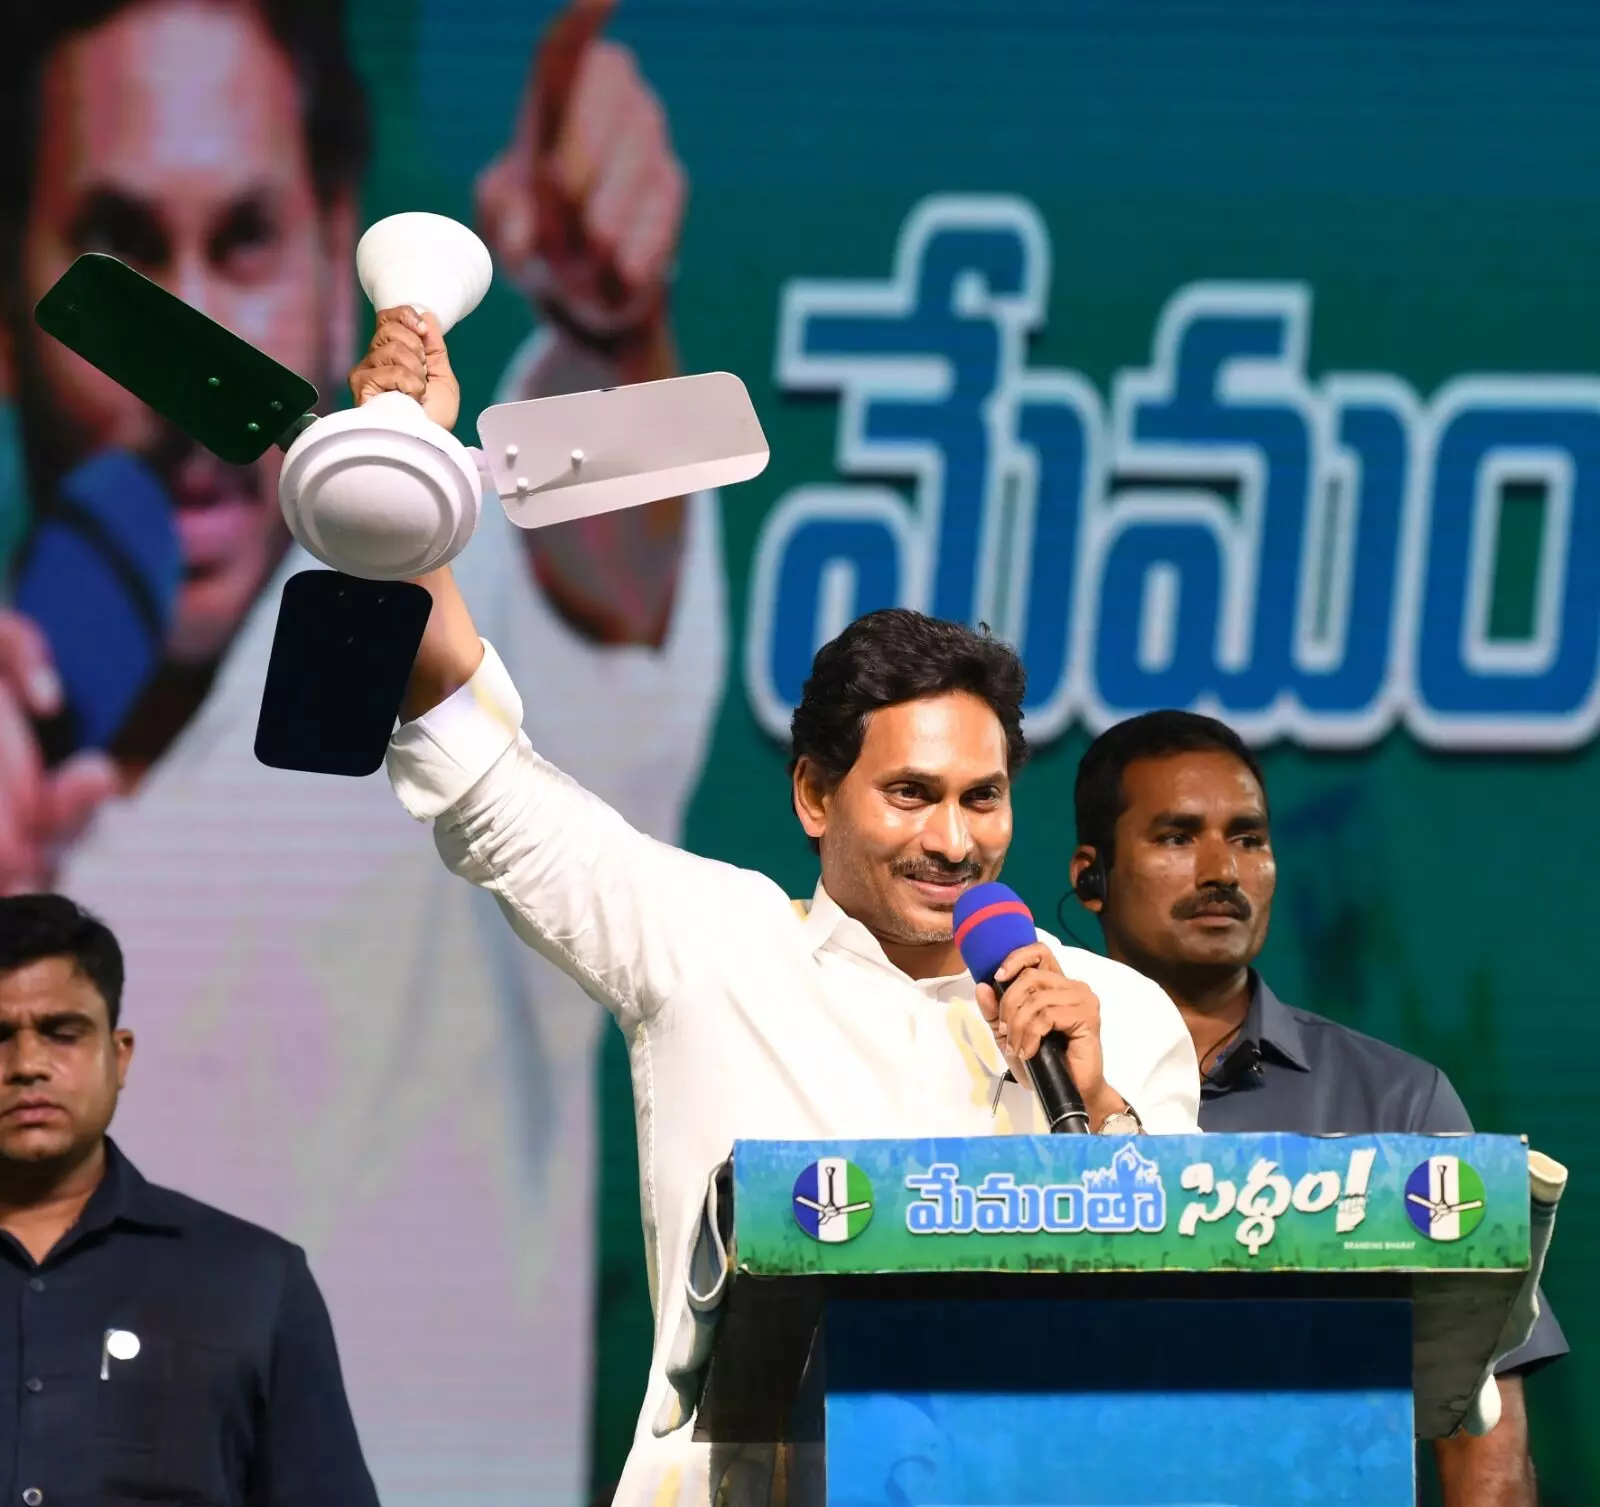 YSRCP provided highest number of govt jobs in last 77 years: YS Jagan